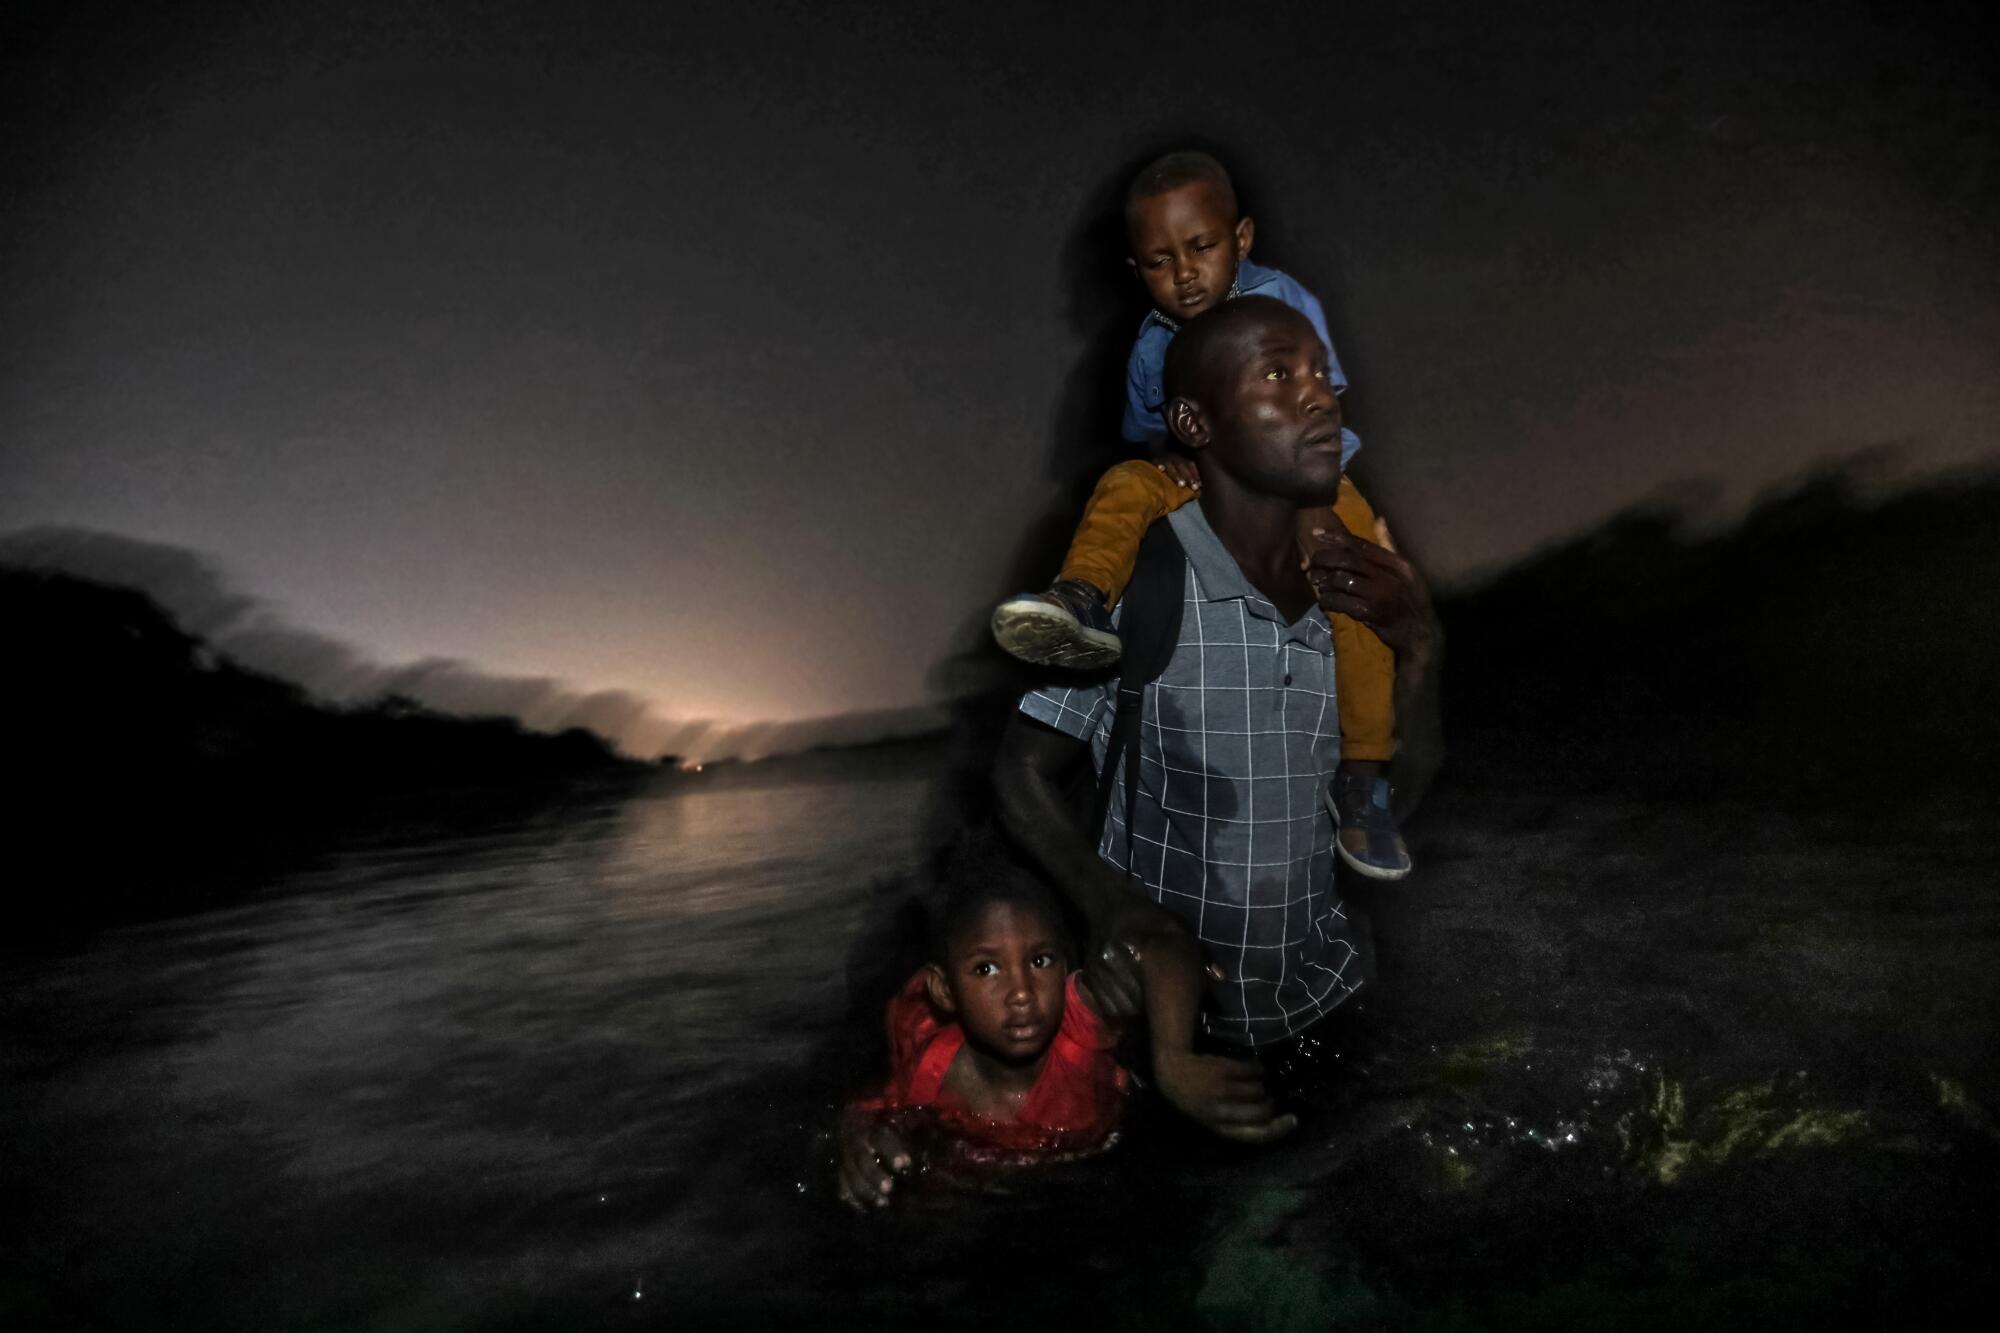 A Haitian man carries one child on his shoulders and holds another by his arm as he wades across the Rio Grande.